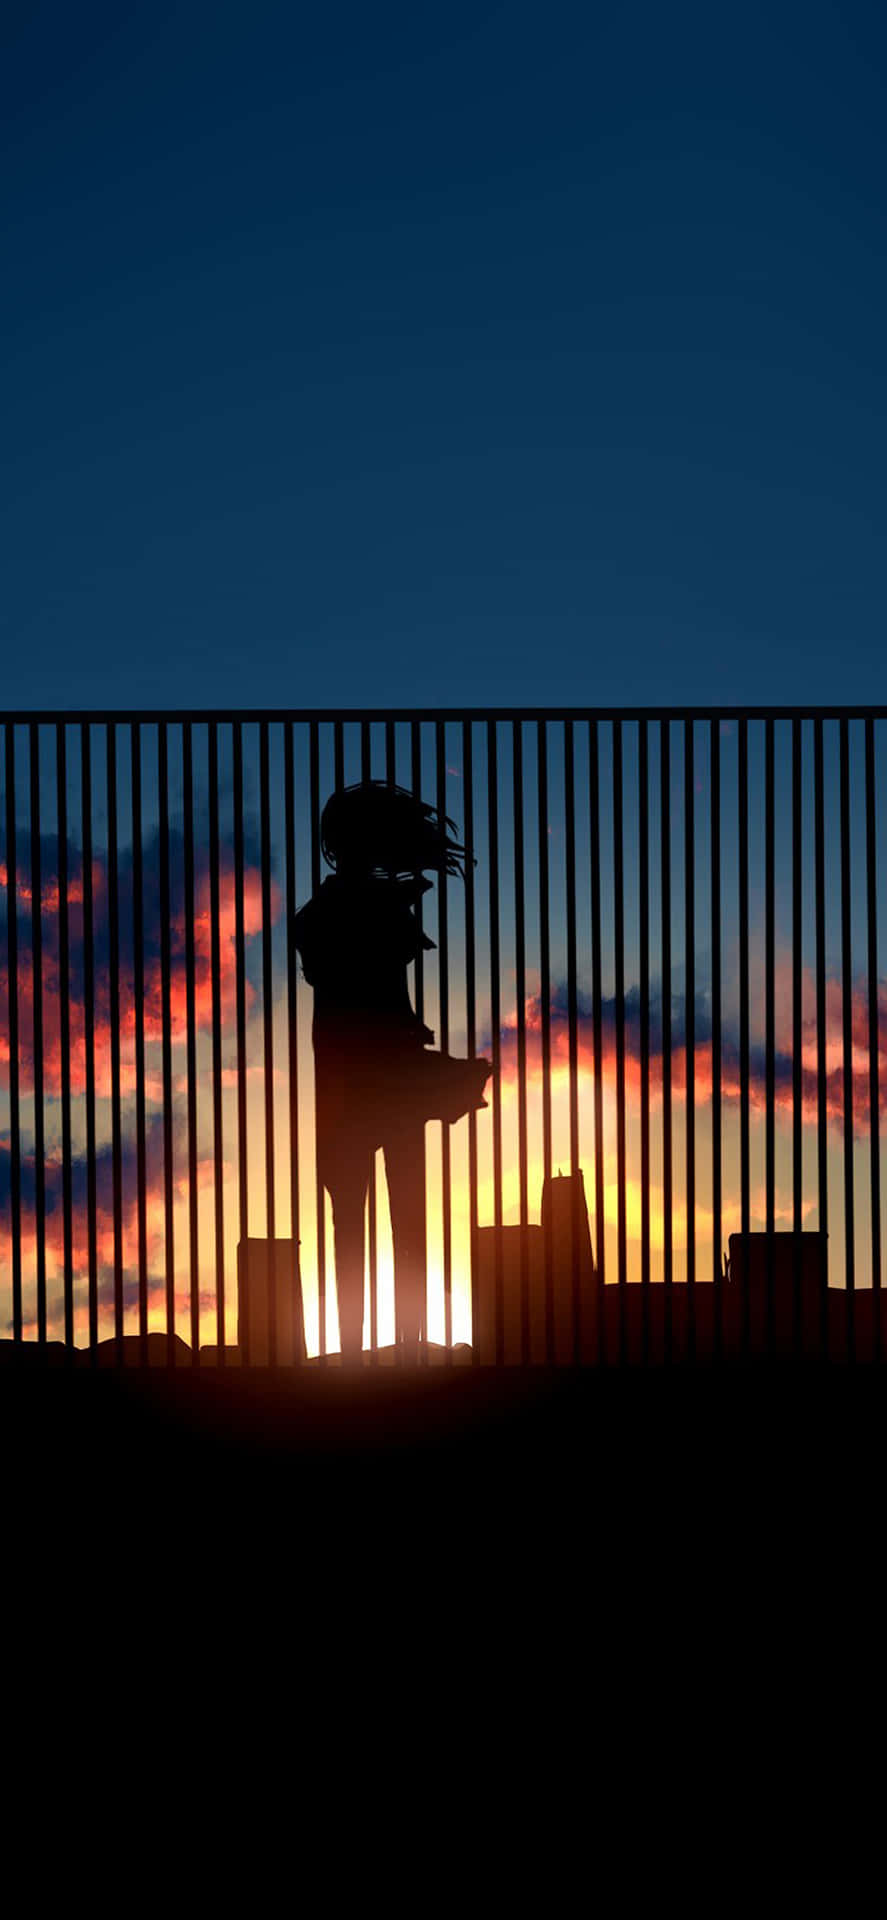 Silhouette Of A Man Standing Behind A Fence Wallpaper